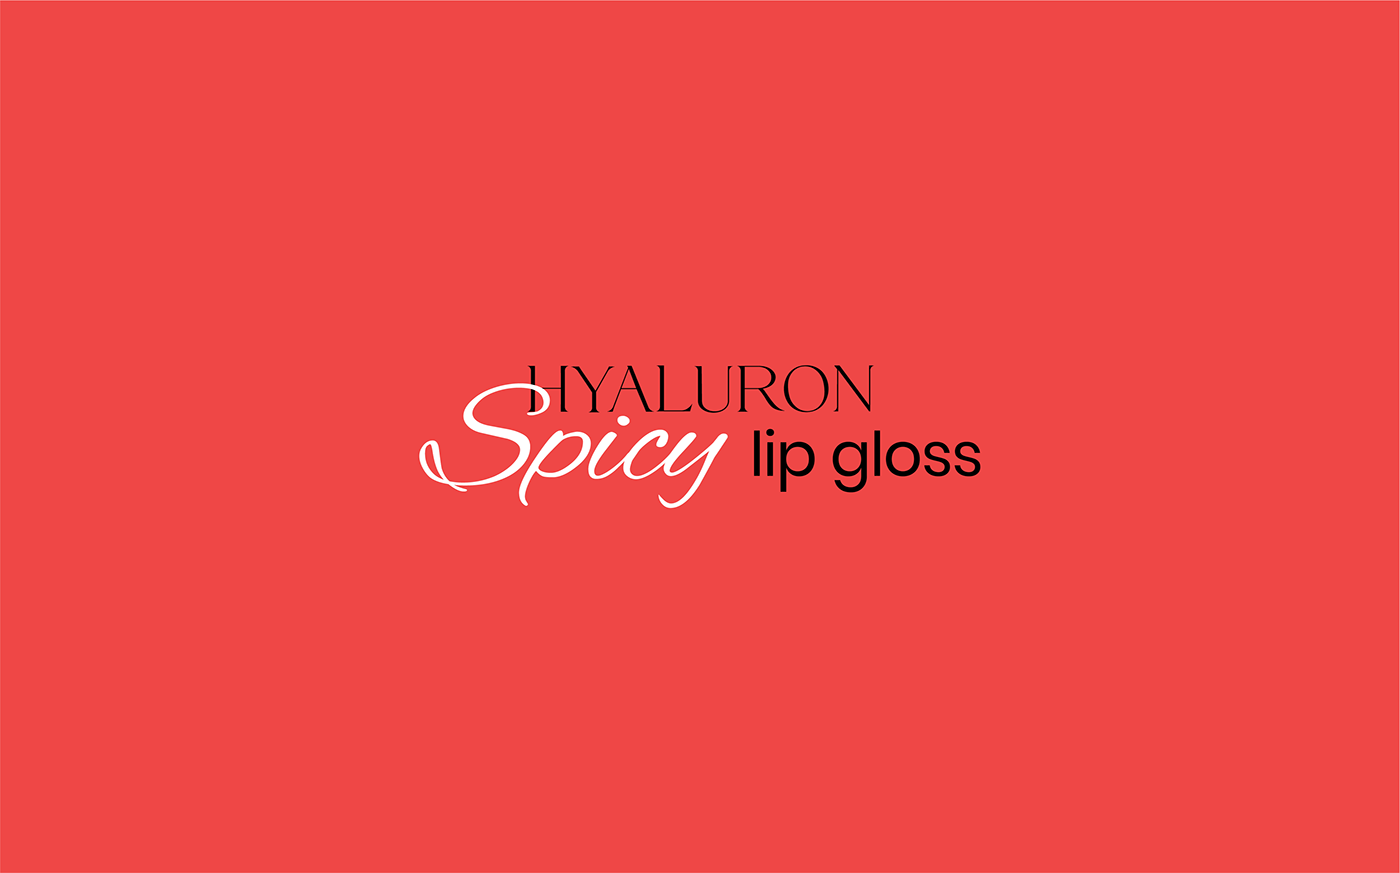 Hyaluron spicy gloss typography design